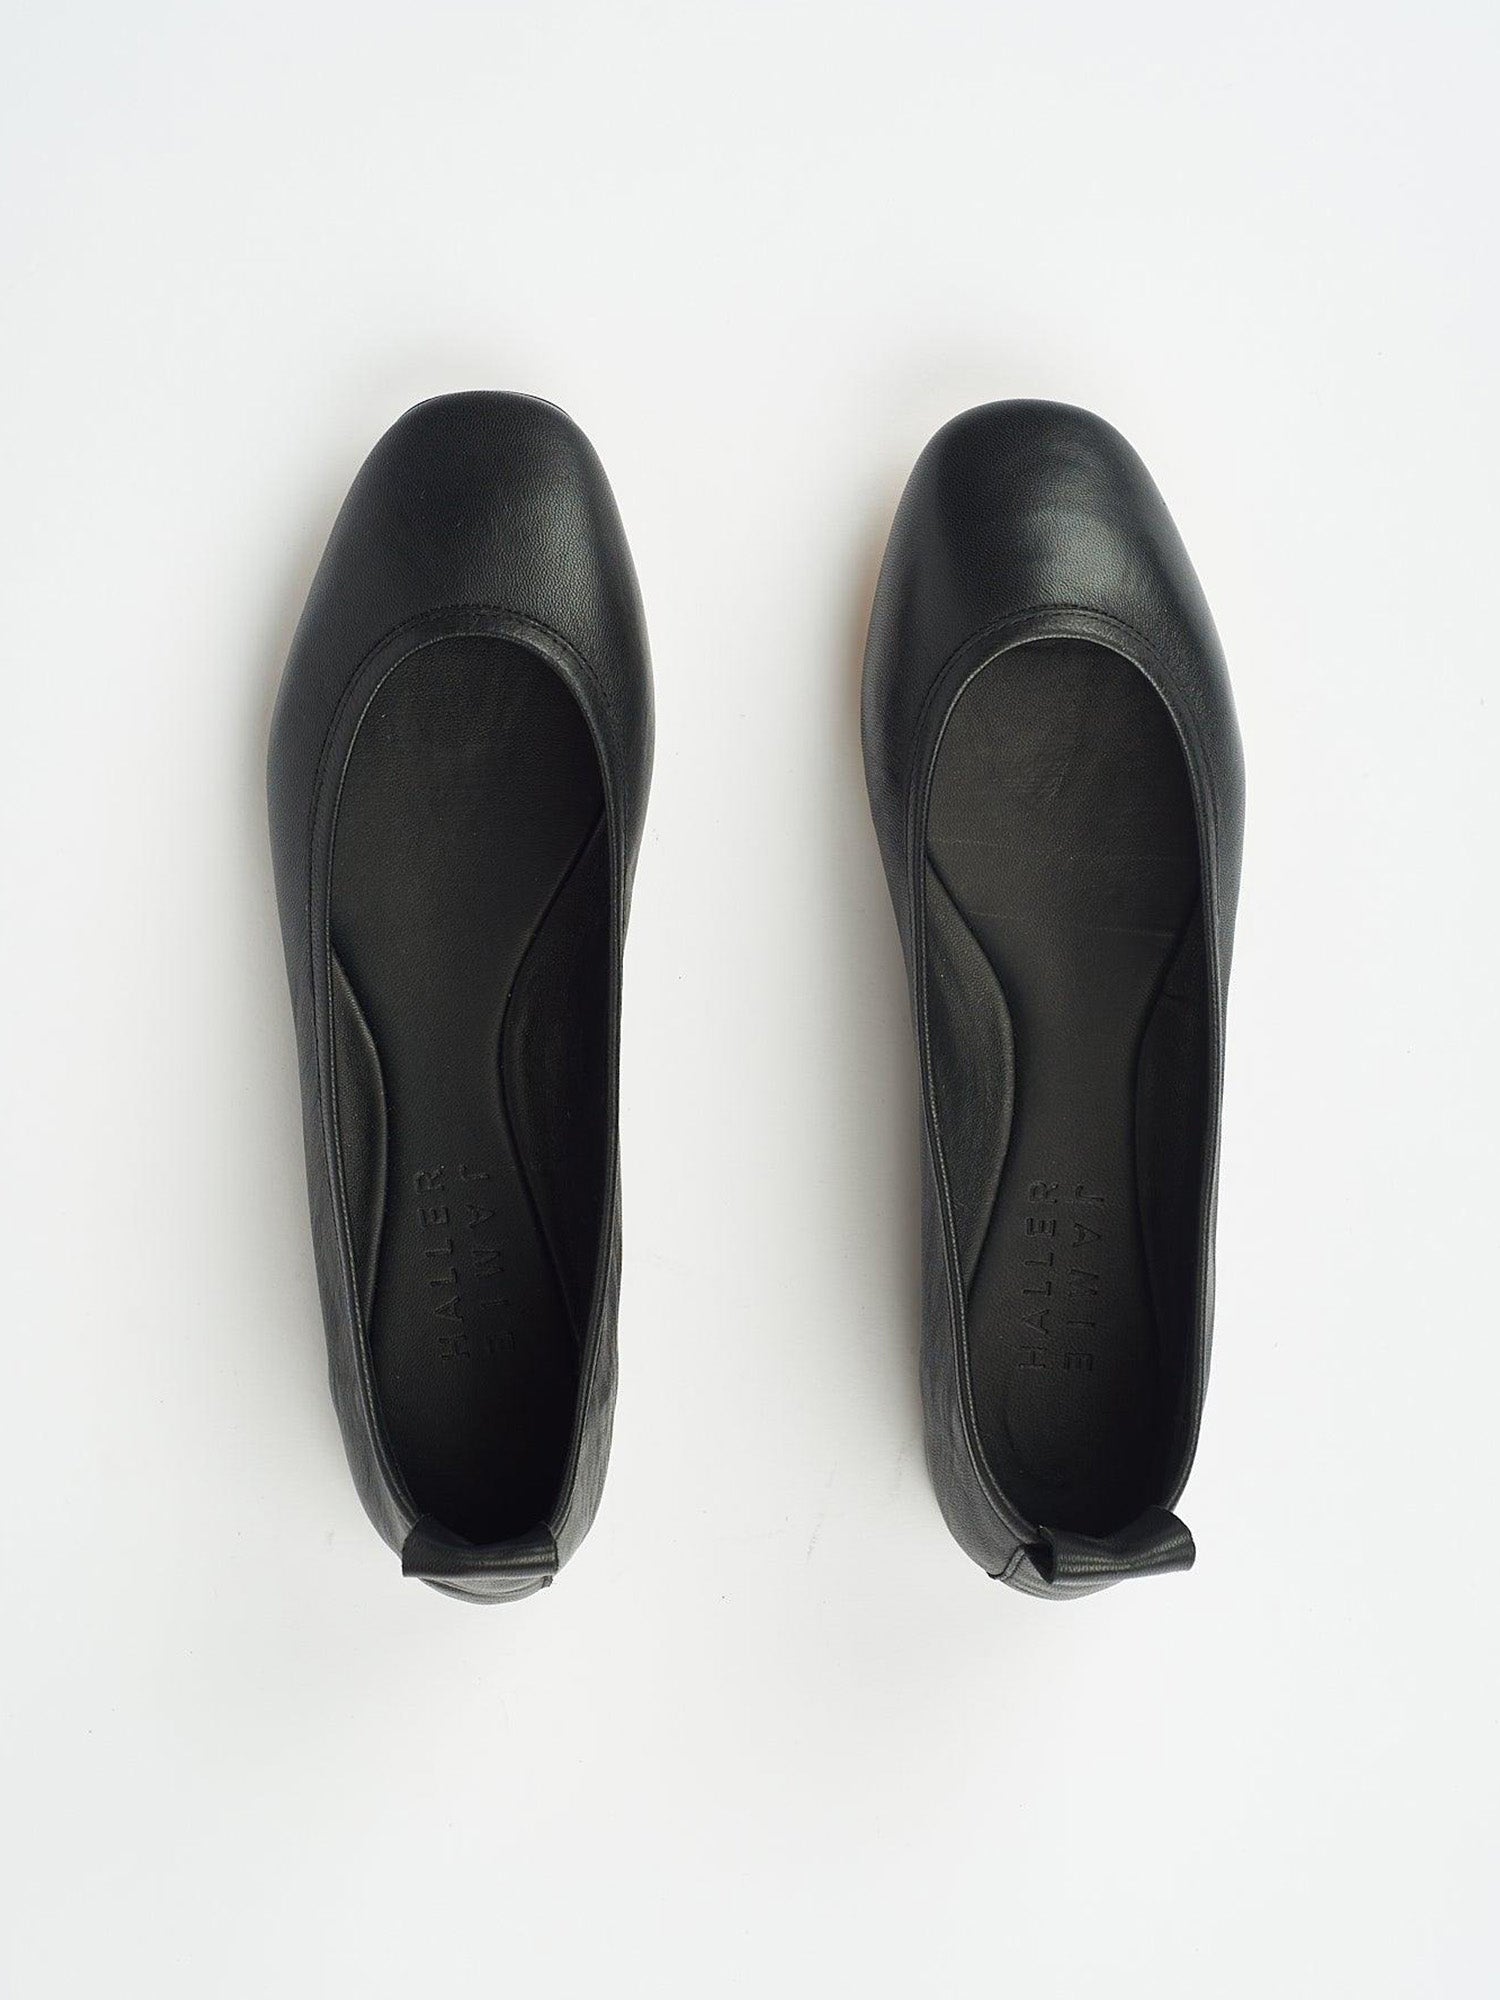 The Modern Ballet in Black Flat View